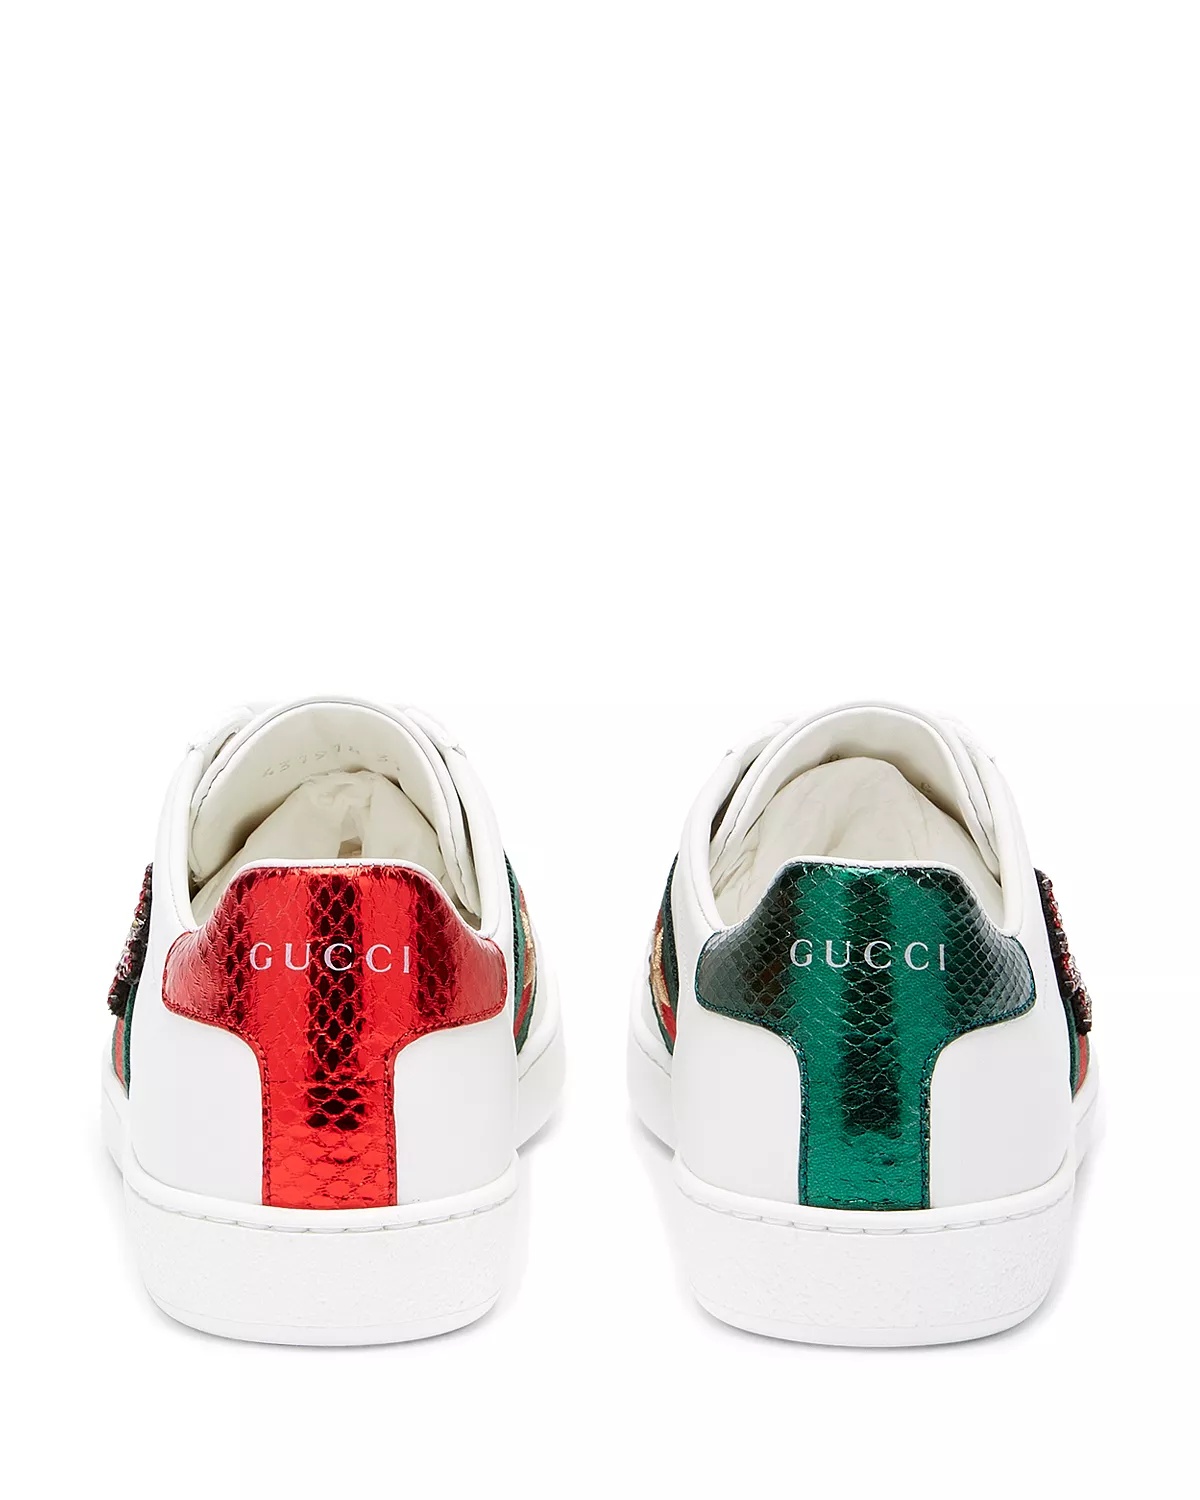 Women's Gucci Ace Embroidered Sneakers - 5